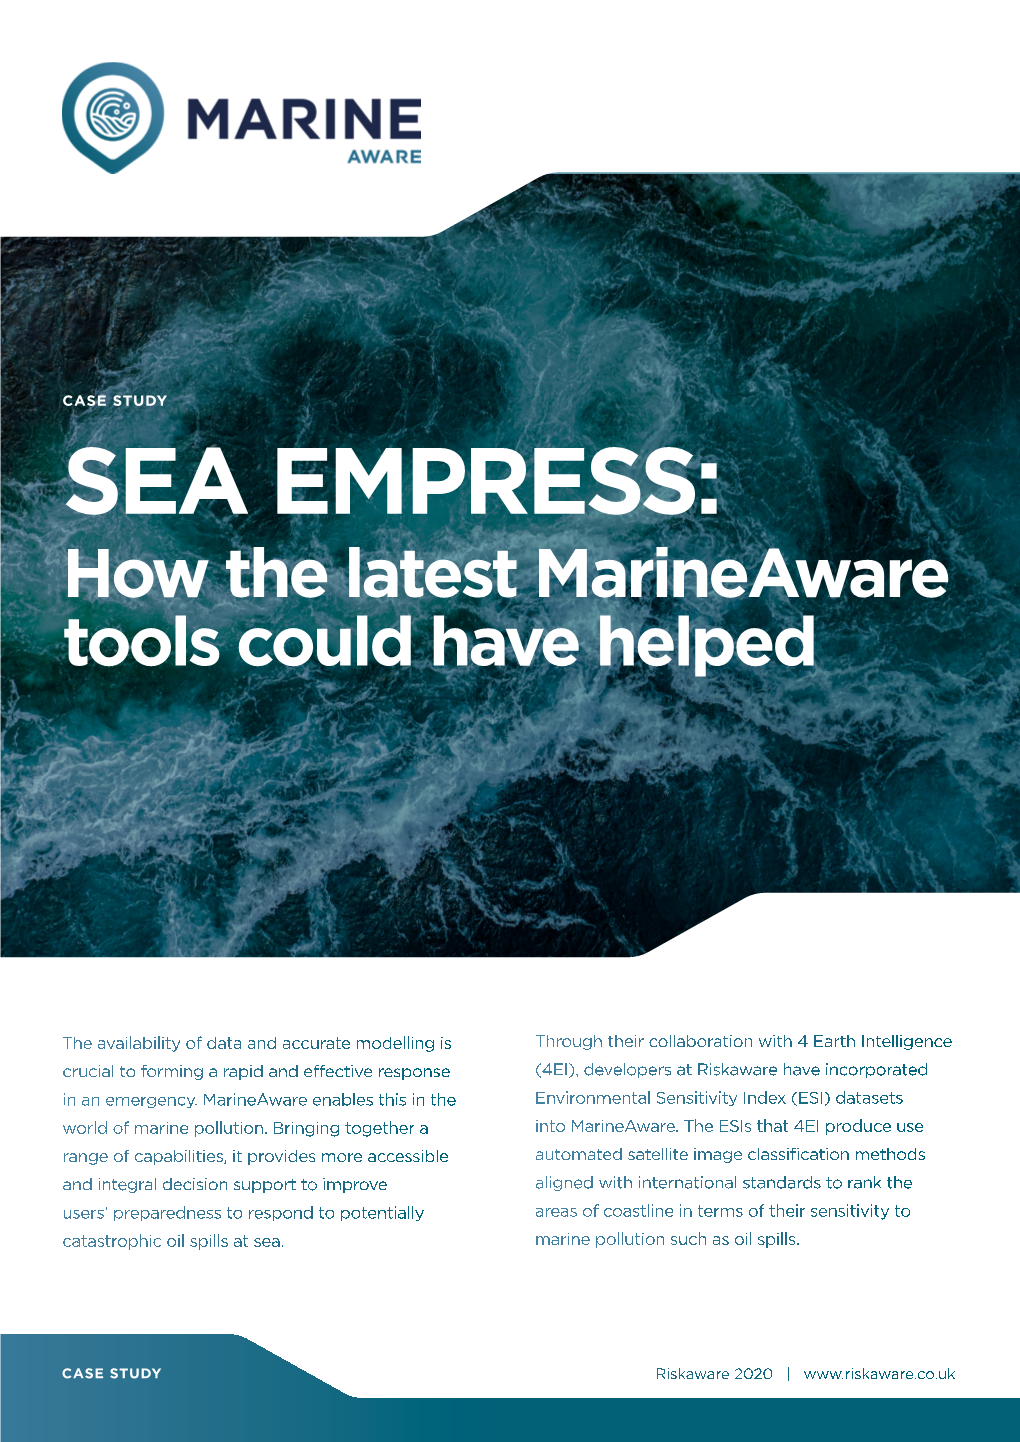 SEA EMPRESS: How the Latest Marineaware Tools Could Have Helped